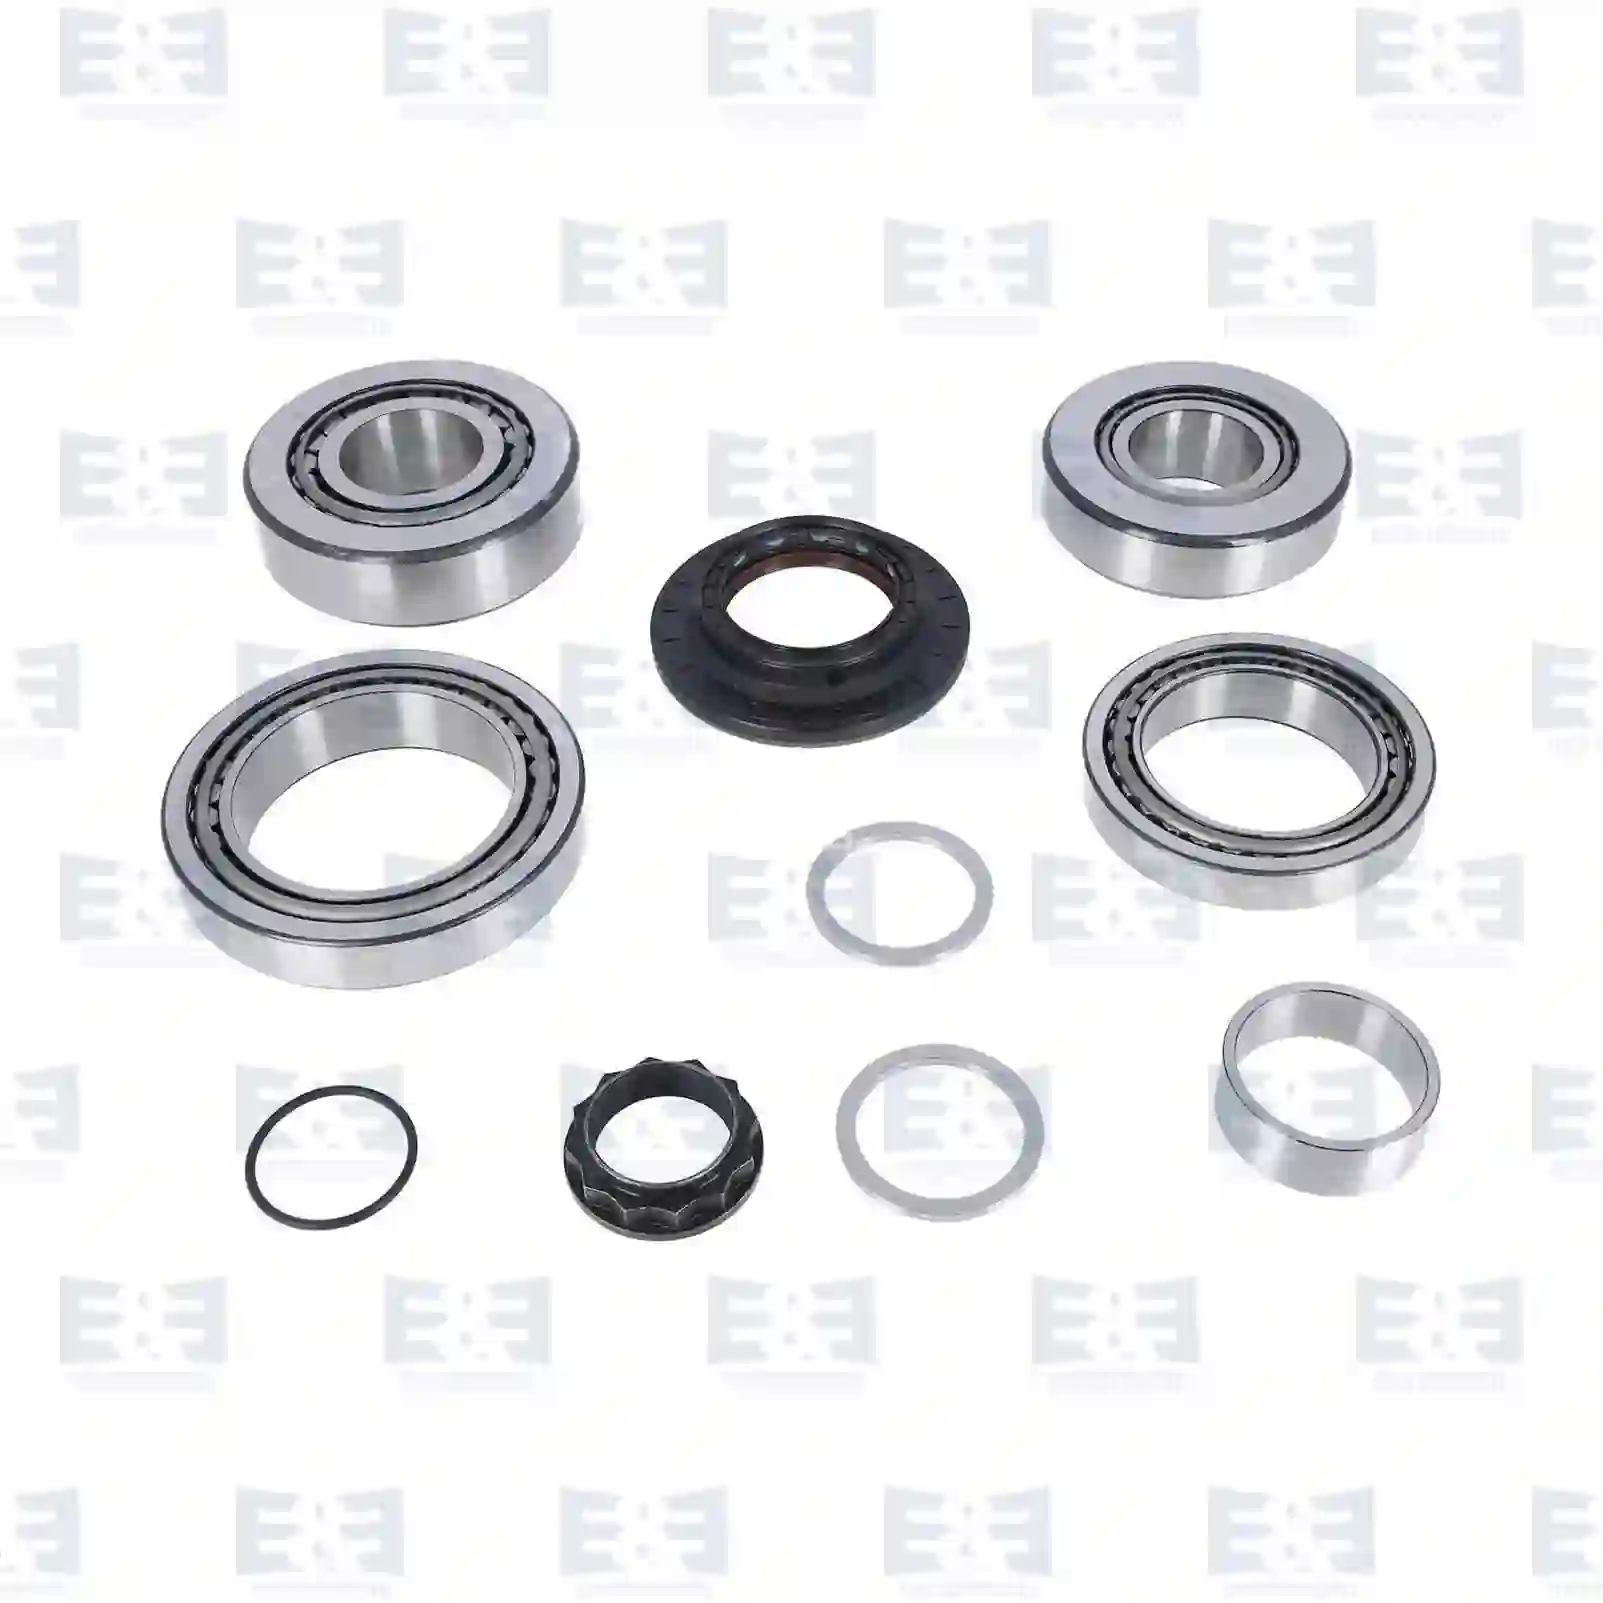  Bearing kit, with seal ring, differential || E&E Truck Spare Parts | Truck Spare Parts, Auotomotive Spare Parts